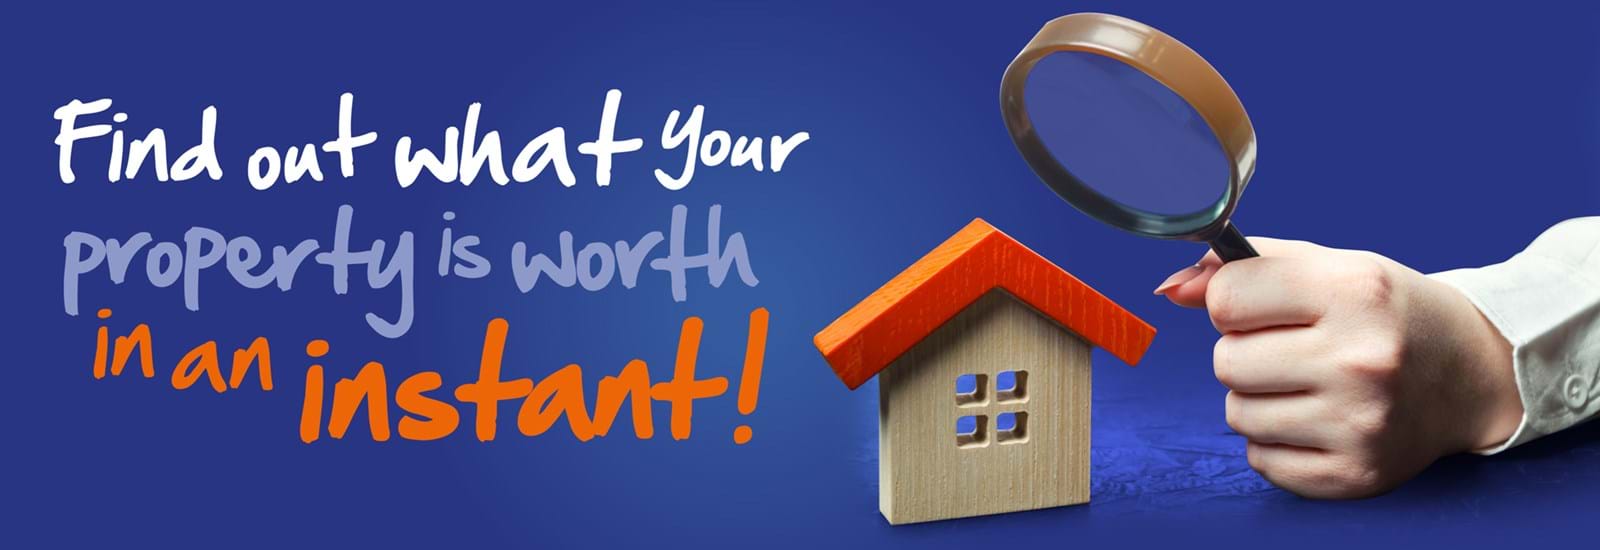 Find out what your property is worth